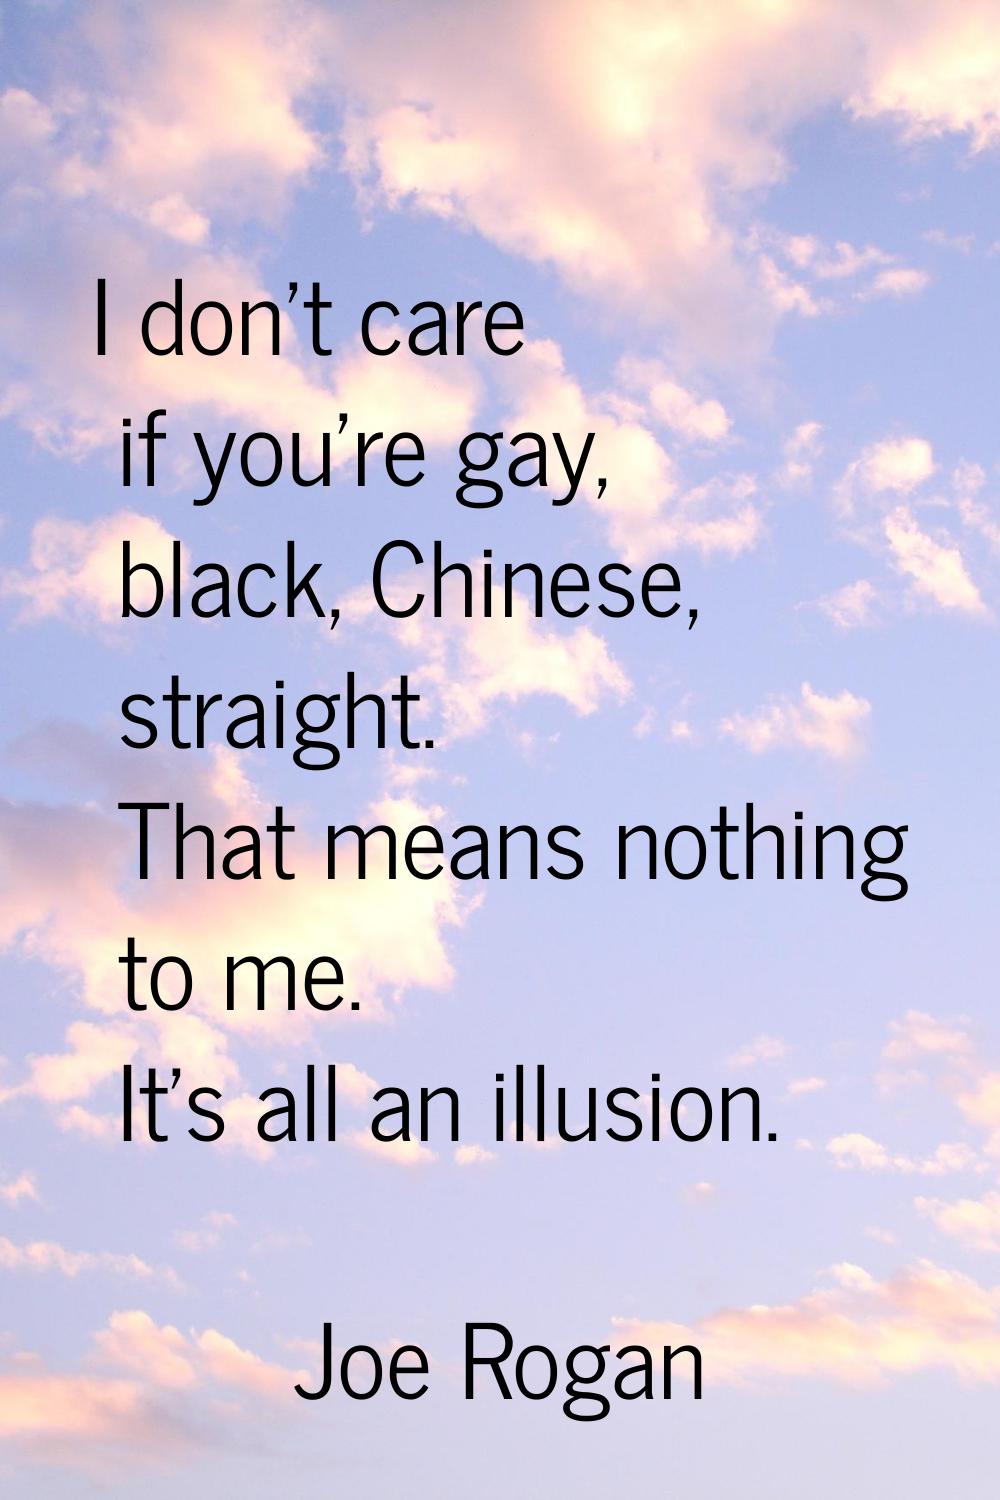 I don't care if you're gay, black, Chinese, straight. That means nothing to me. It's all an illusio